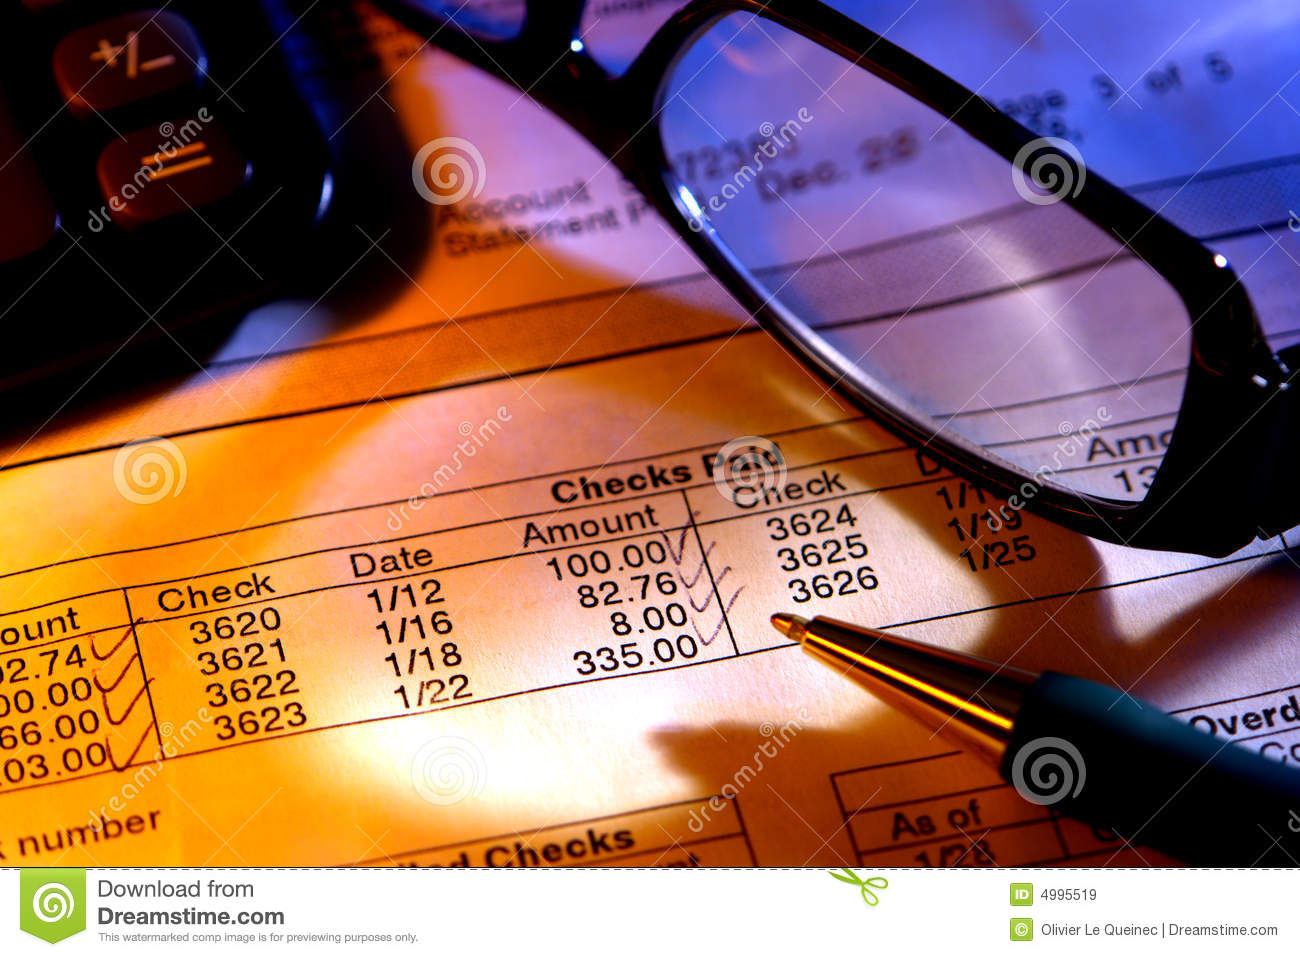 Checking Account Statement With Glasses And Pen Royalty Free Stock